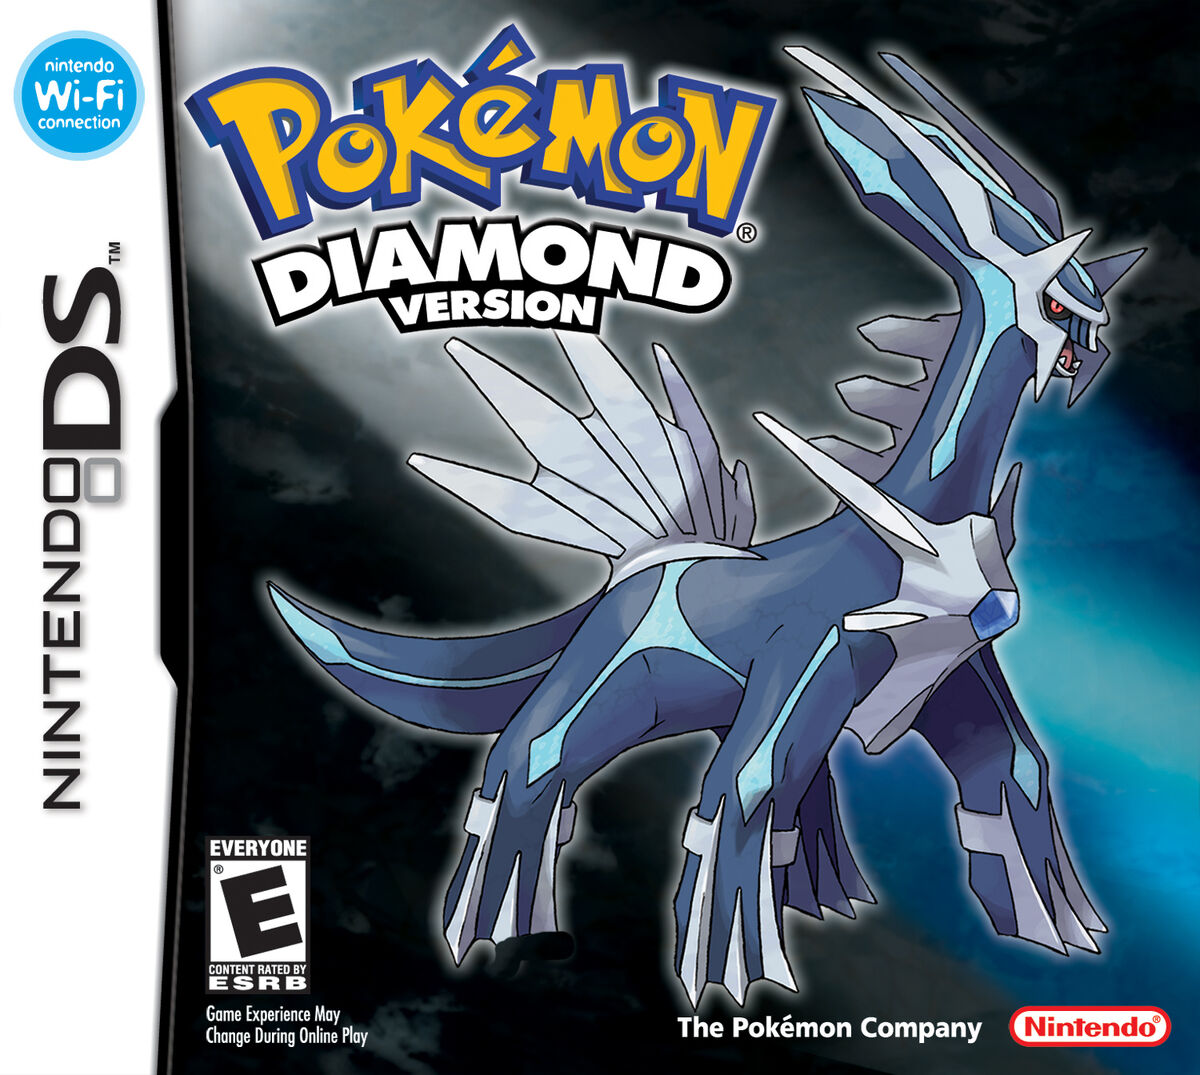 So far we know that we have 10 exclusives pokémons (5 per version),  compared to the 20 exclusives per version in the originals Diamond and  Pearl. Do you think that the final